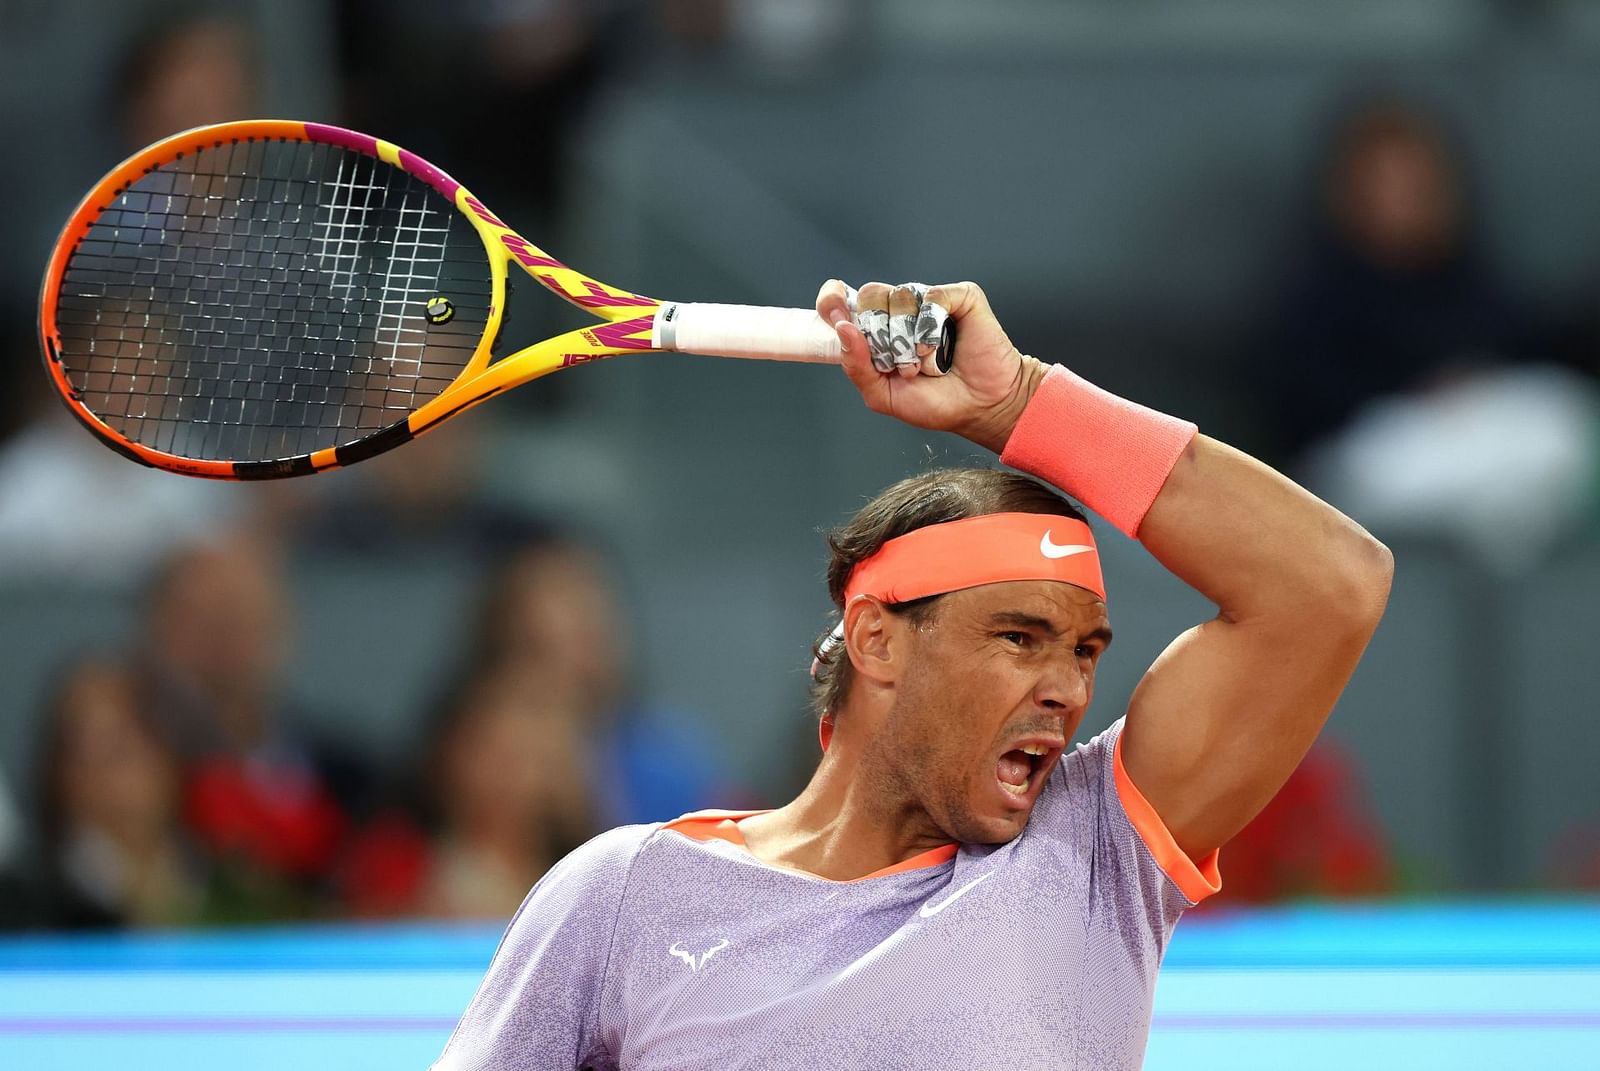 WATCH Rafael Nadal greeted by 1000s of fans chanting his name ahead of